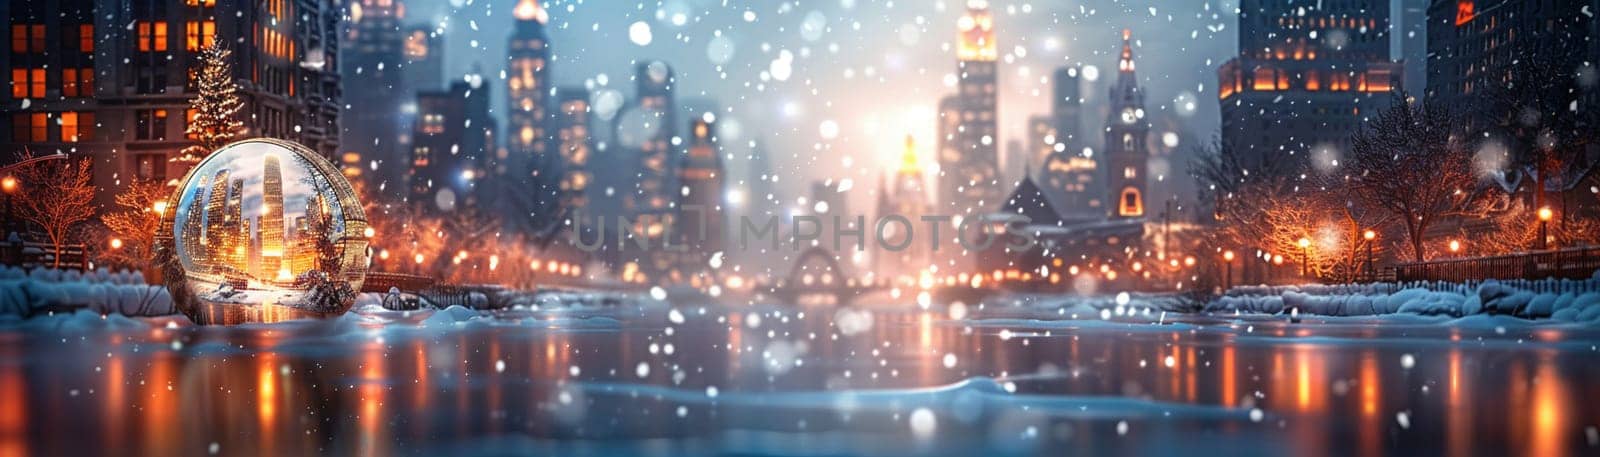 City life in a snow globe rendered with a whimsical charming style by Benzoix